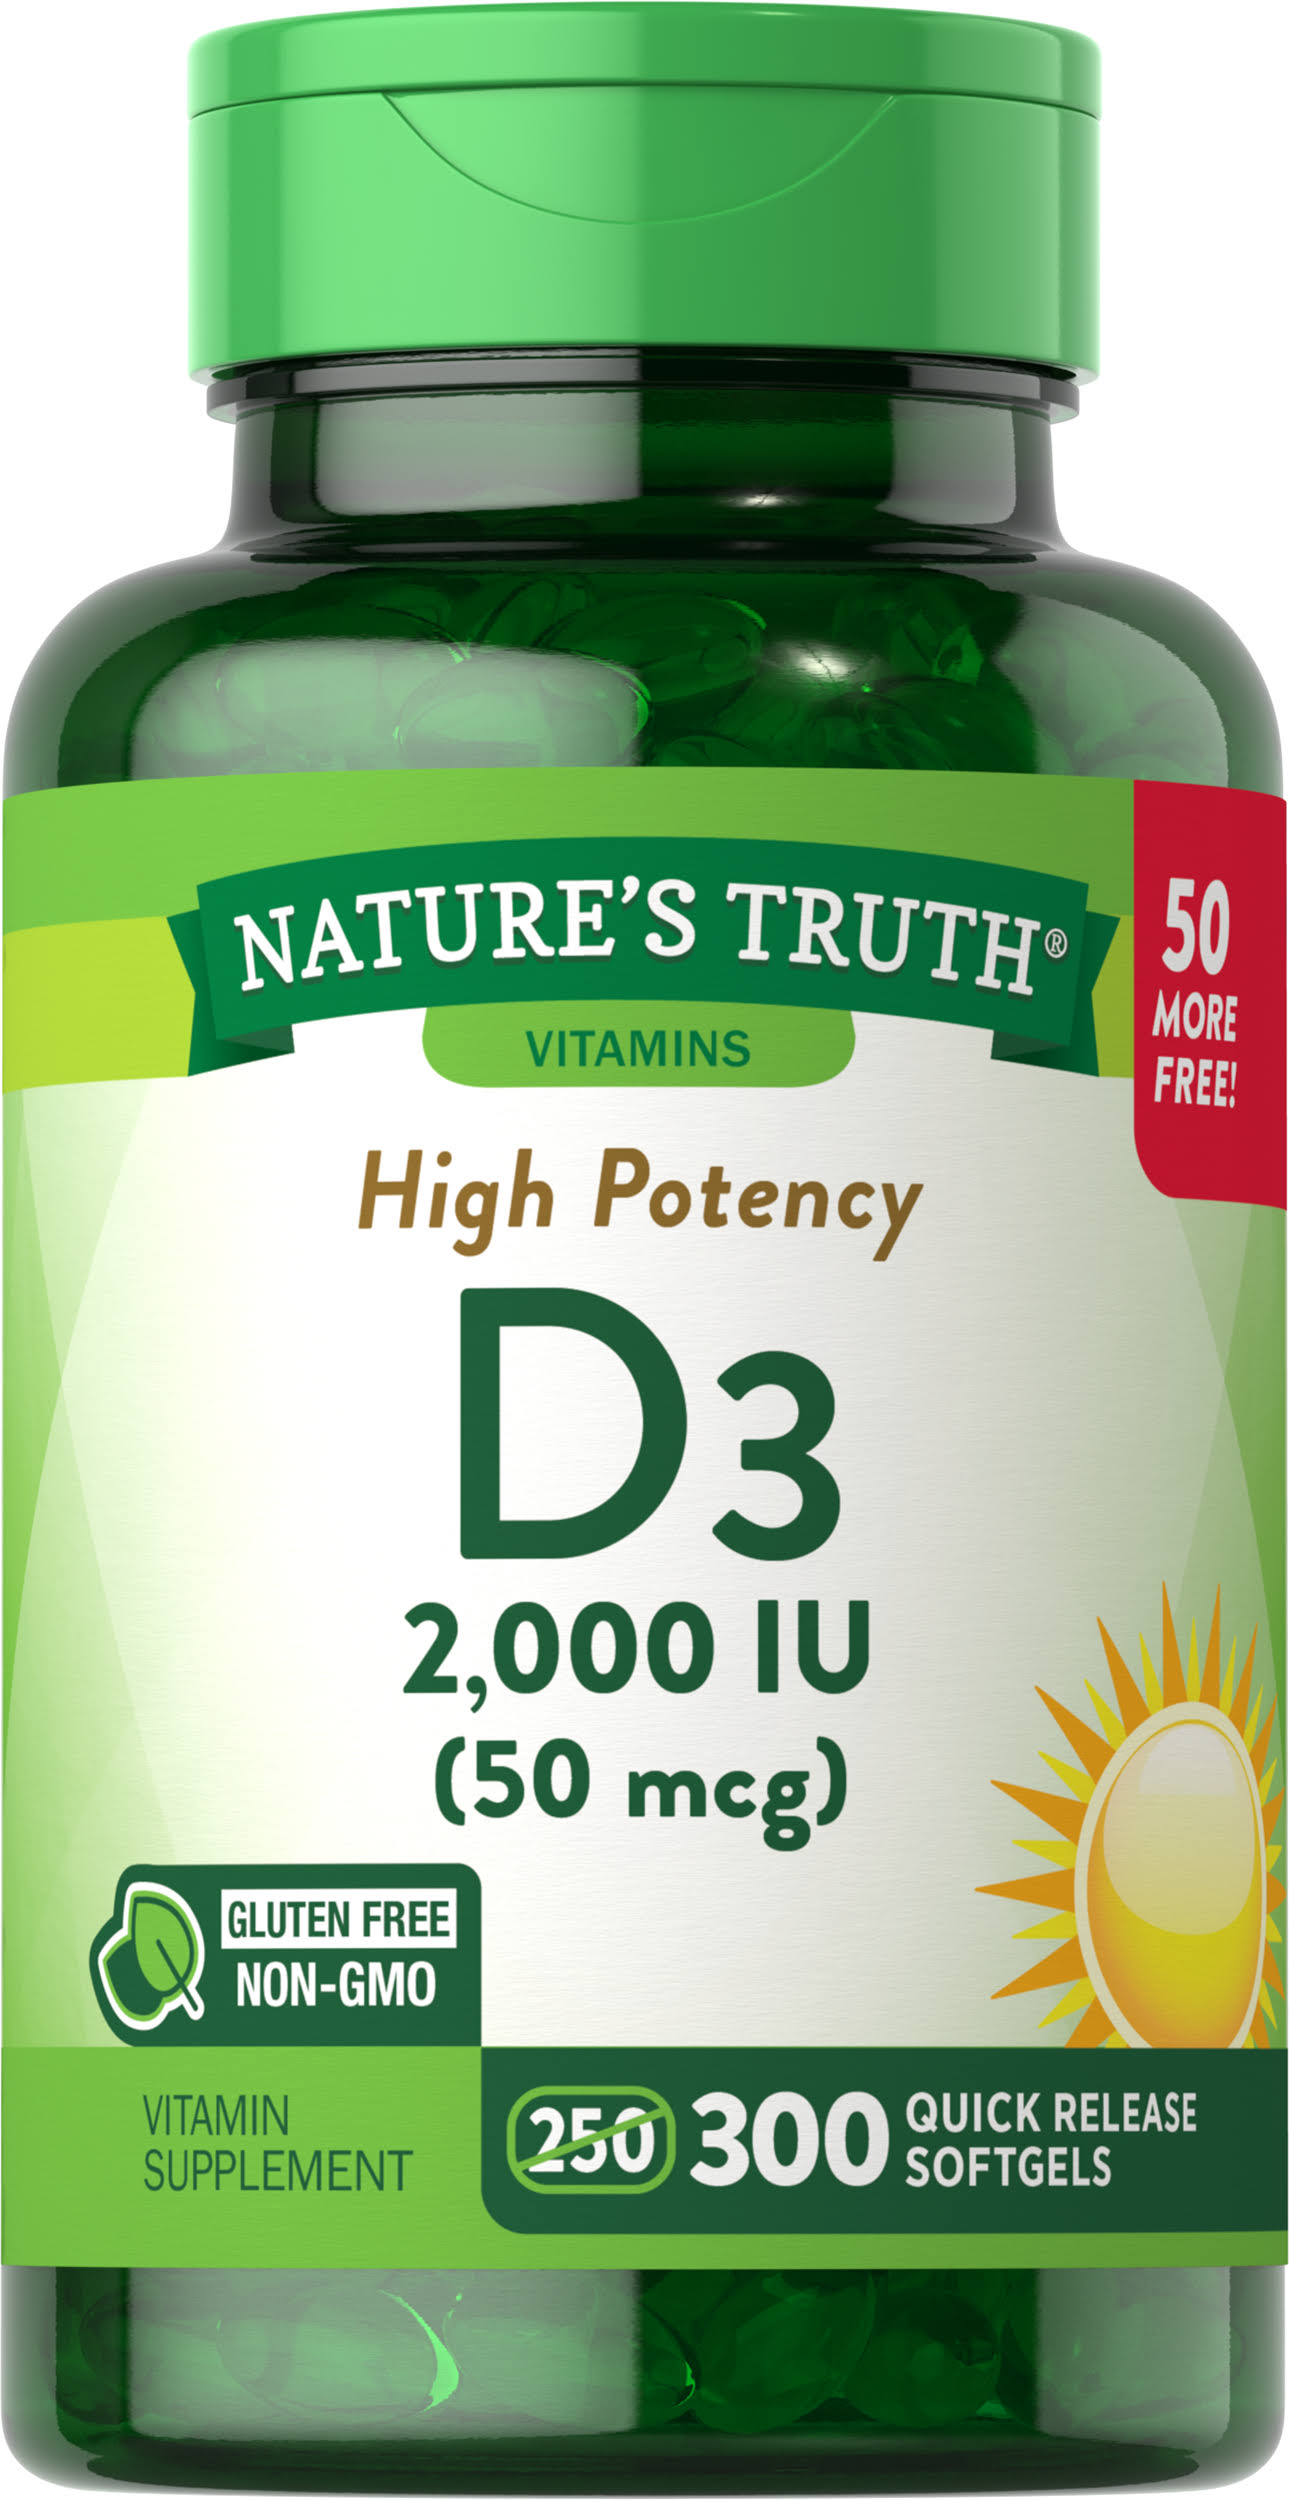 Nature's Truth High Potency Vitamin D3 2000 IU Supplement - 300ct